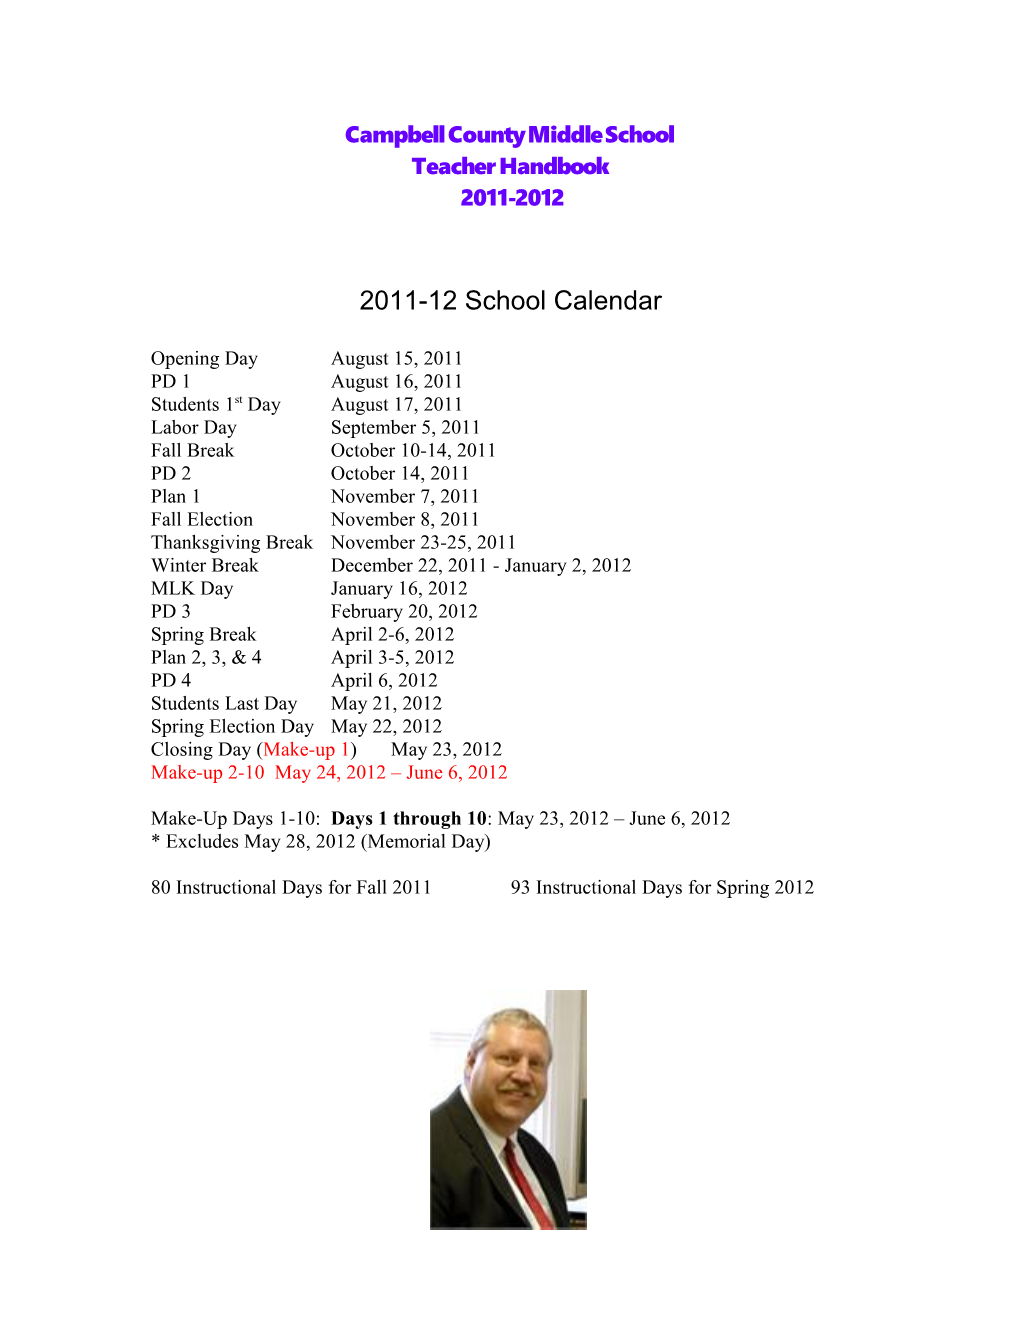 Suggested Master Schedule 2011-12